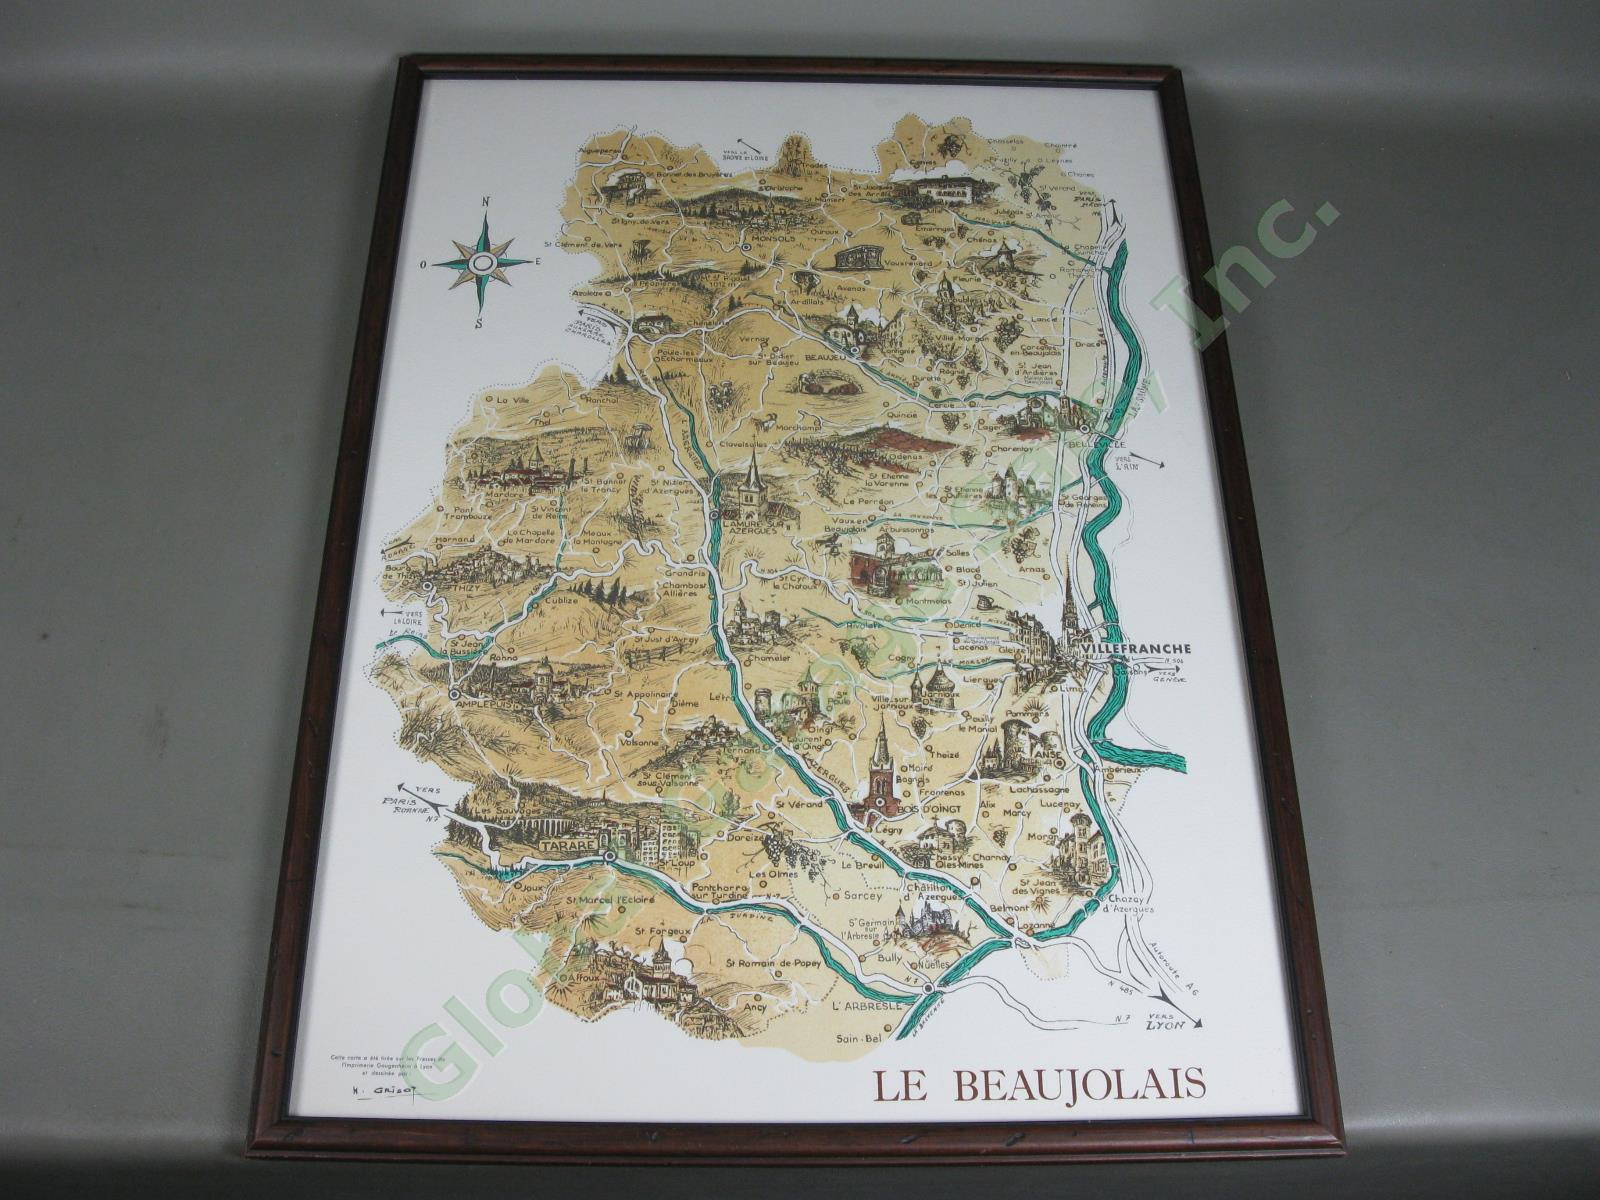 Vintage 1955 Henri Grisot Le Beaujolais French Pictorial Wine Region Map Framed